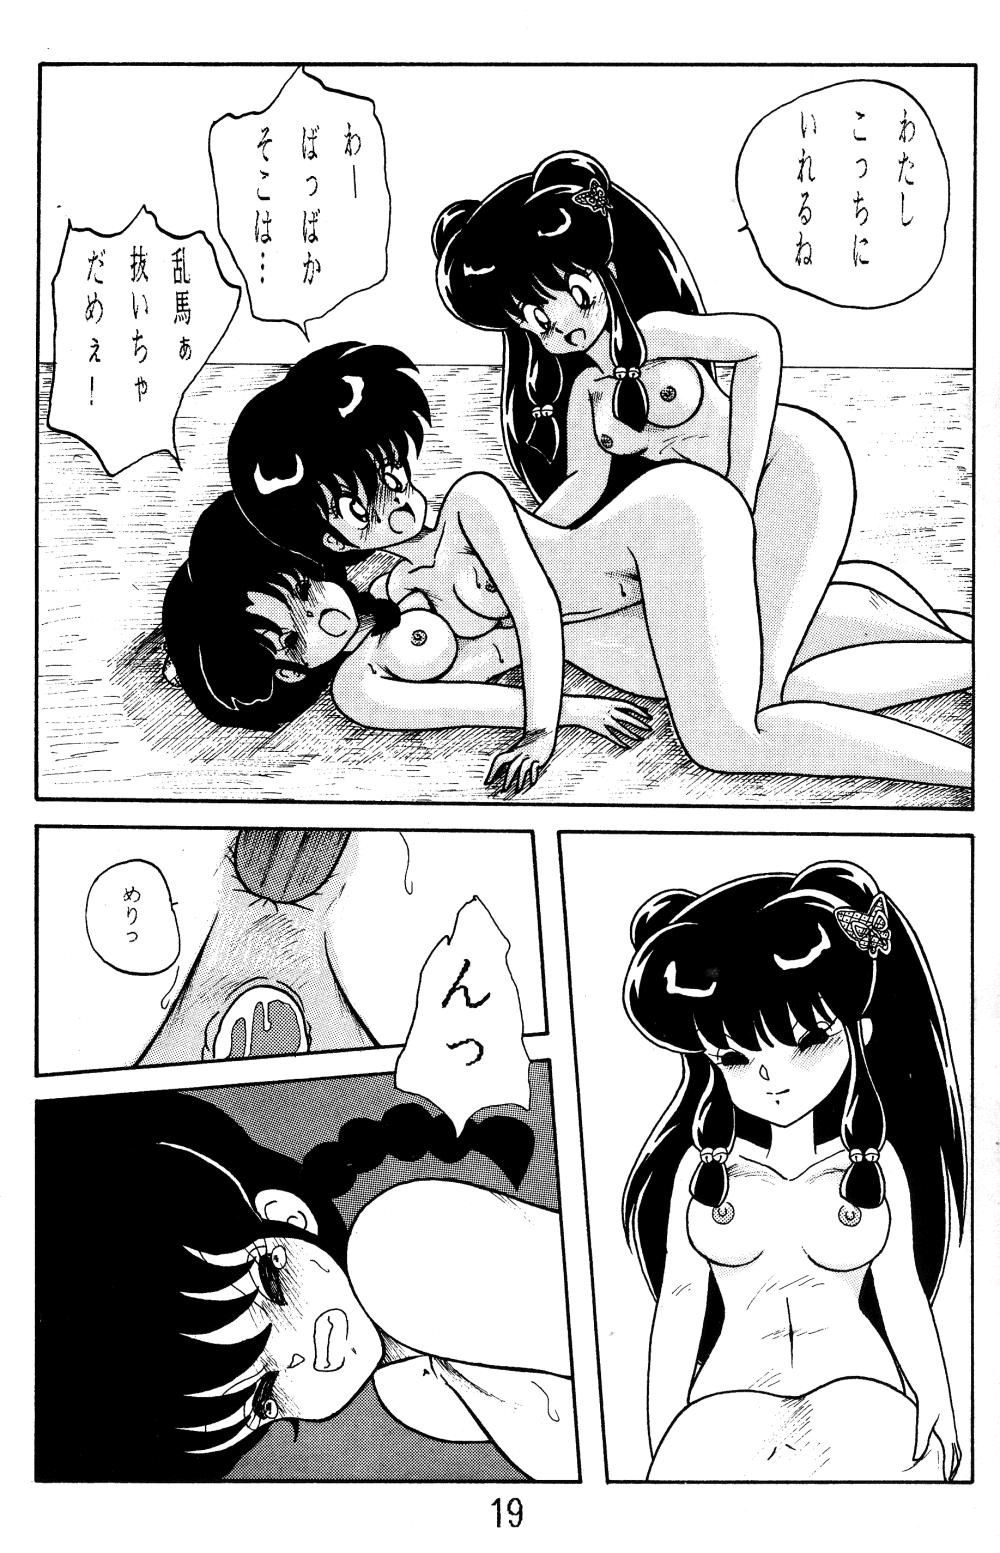 NOTORIOUS Ranma 1/2 Special 17